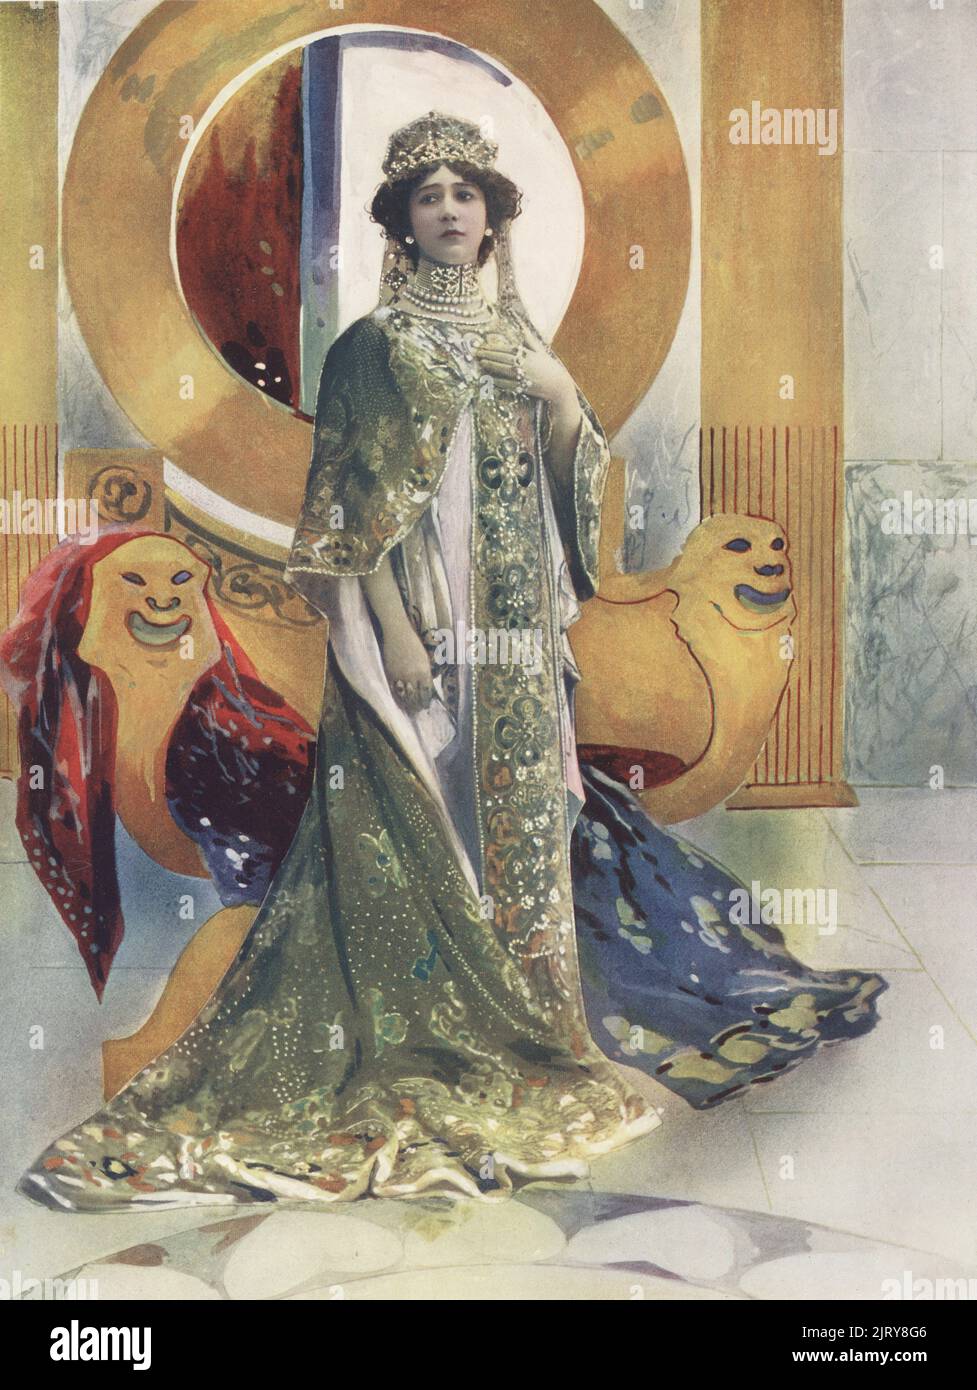 Madame Carolina Otero in L'Imperatrice, a ballet by jean Richepin and Paul Vidal, performed at the Theatre Olympia in 1901. Agustina del Carmen Otero Iglesias, La Belle Otero, Spanish dancer, singer and later courtesan, 1868-1965. Photograph by Leopold Emile Reutlinger. Colour printing of a hand-coloured illustration based on a monochrome photograph from George Newnes’s Players of the Day, London, 1905. Stock Photo